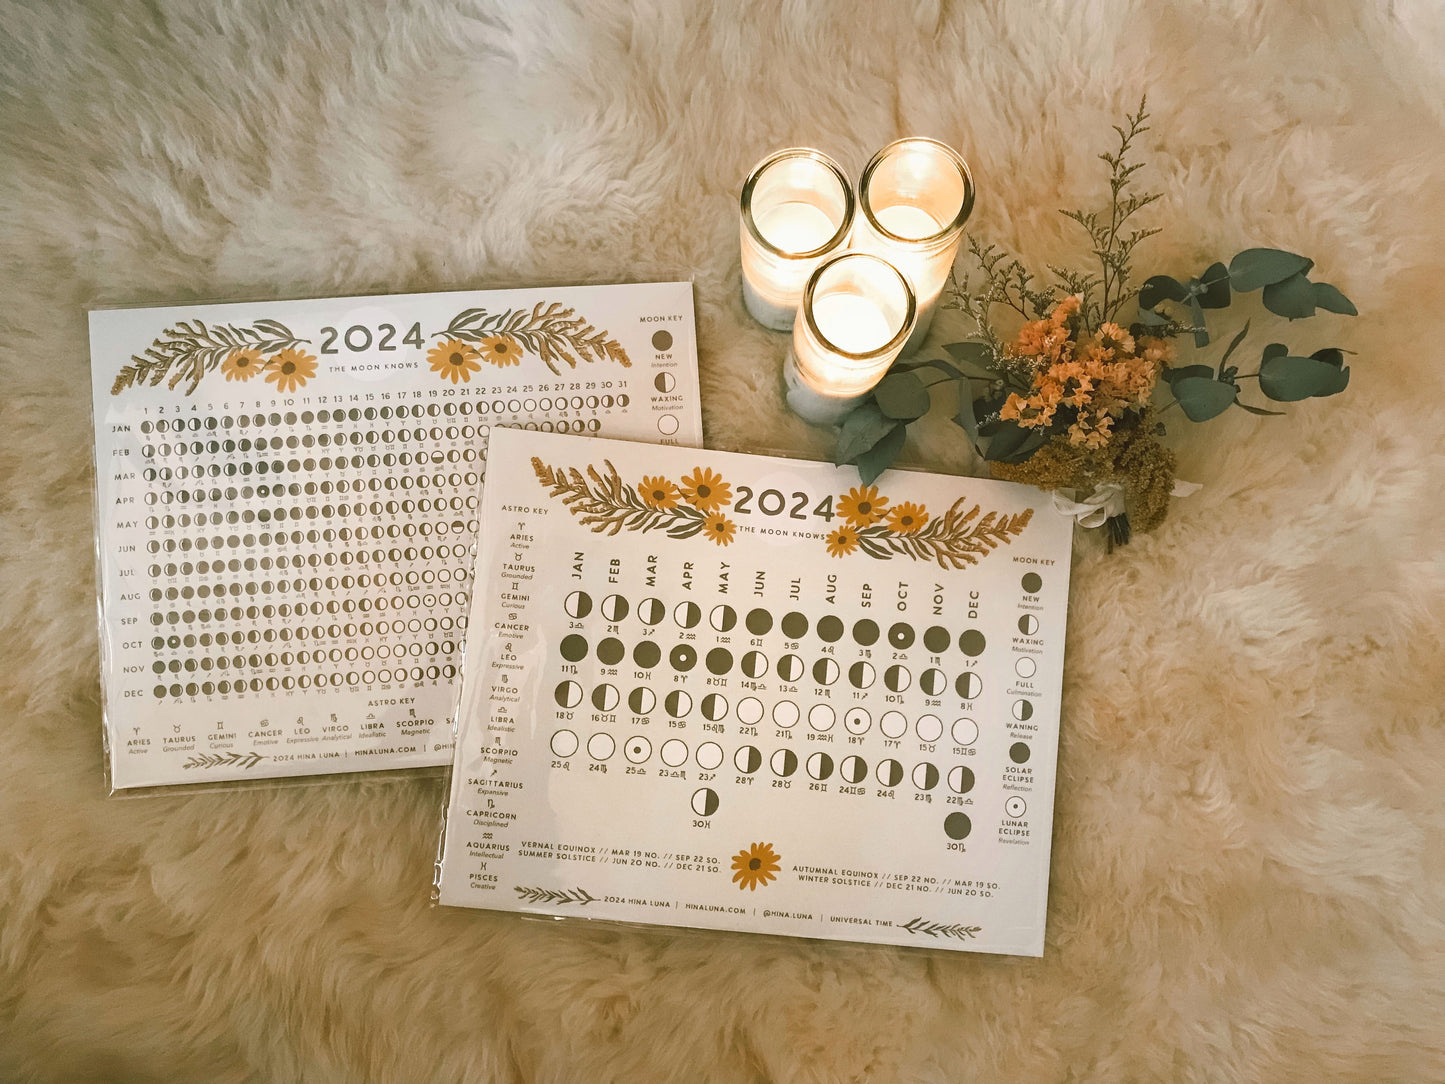 Hina Luna's 2024 moon calendar designs laying on top of a white sheepskin rug surrounded by candles and a dried flower bouquet